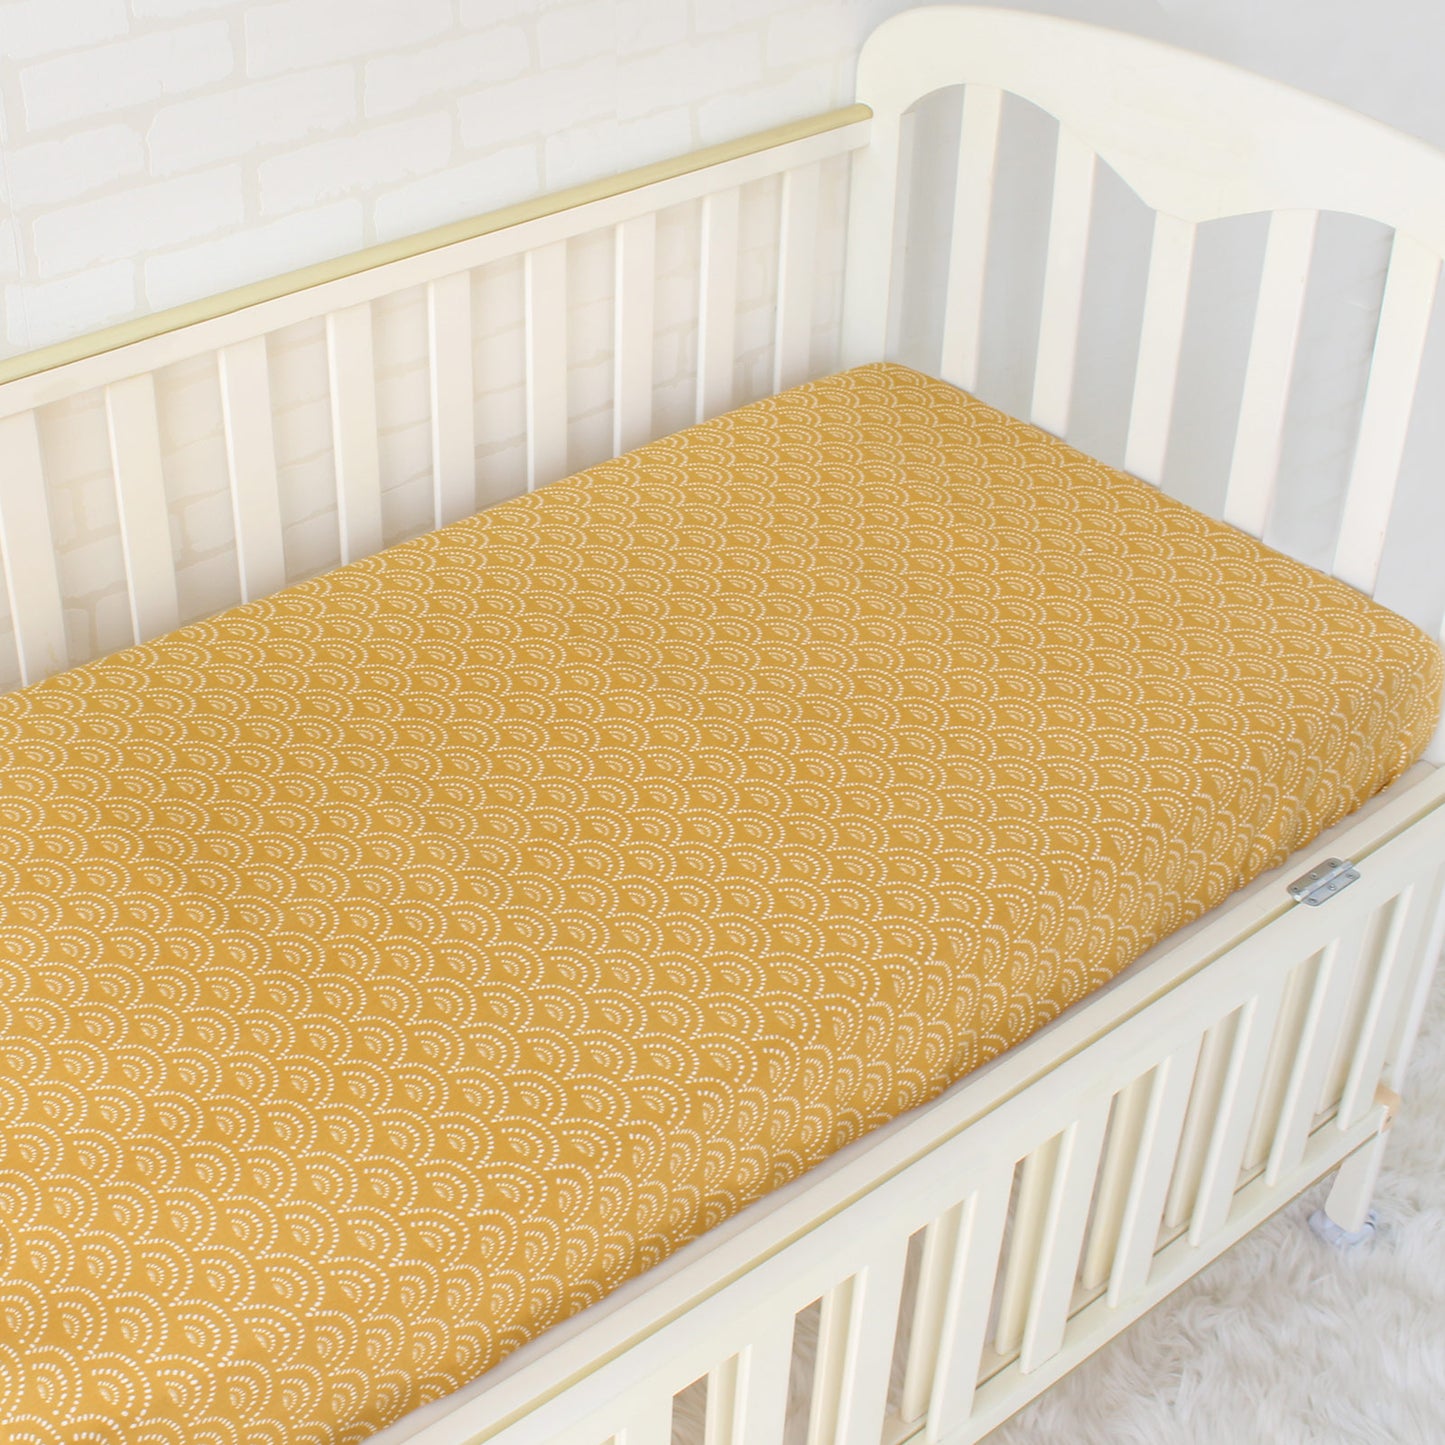 Hatch Bamboo and Muslin Cot Fitted Sheet